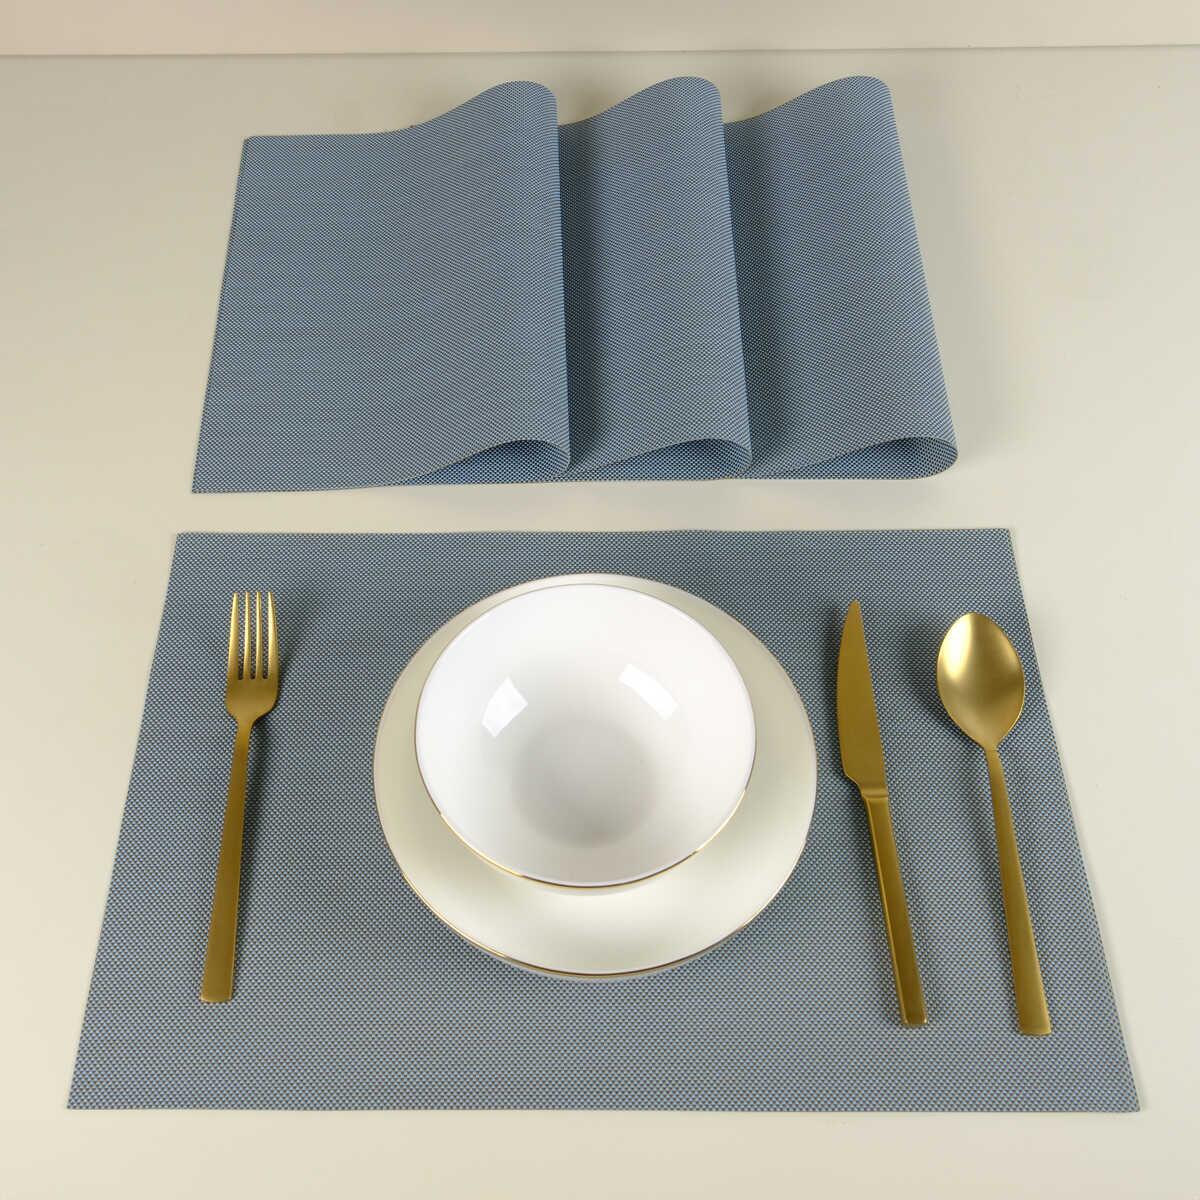 Maxstyle Harmony Oasis 4 Piece Placemat Set 30x45 cm